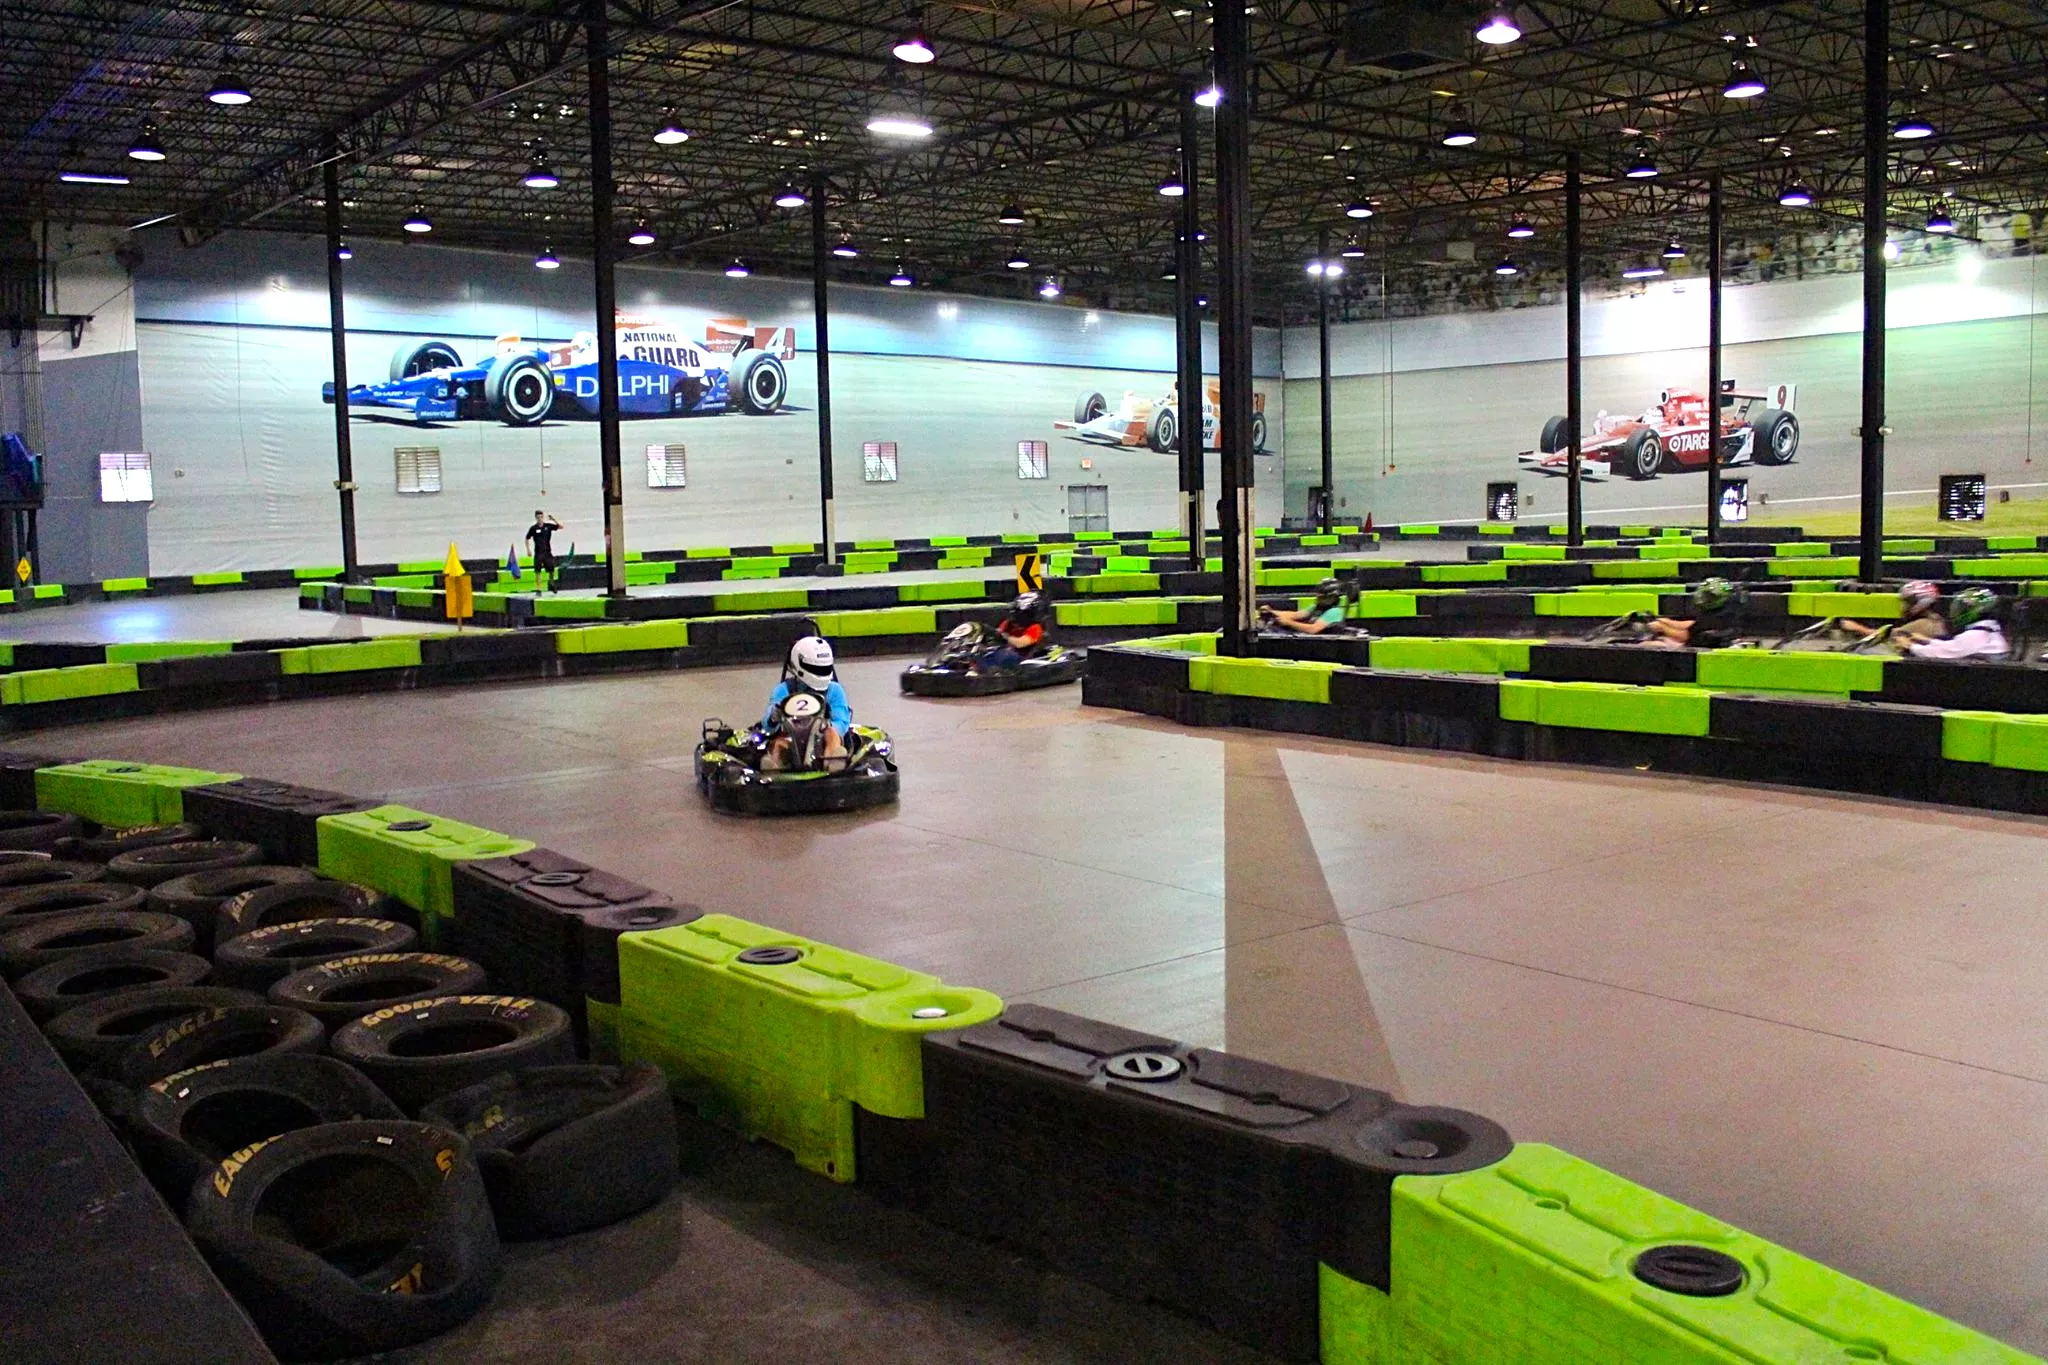 Andretti Indoor Karting & Games Orlando in USA, North America | Karting - Rated 9.5